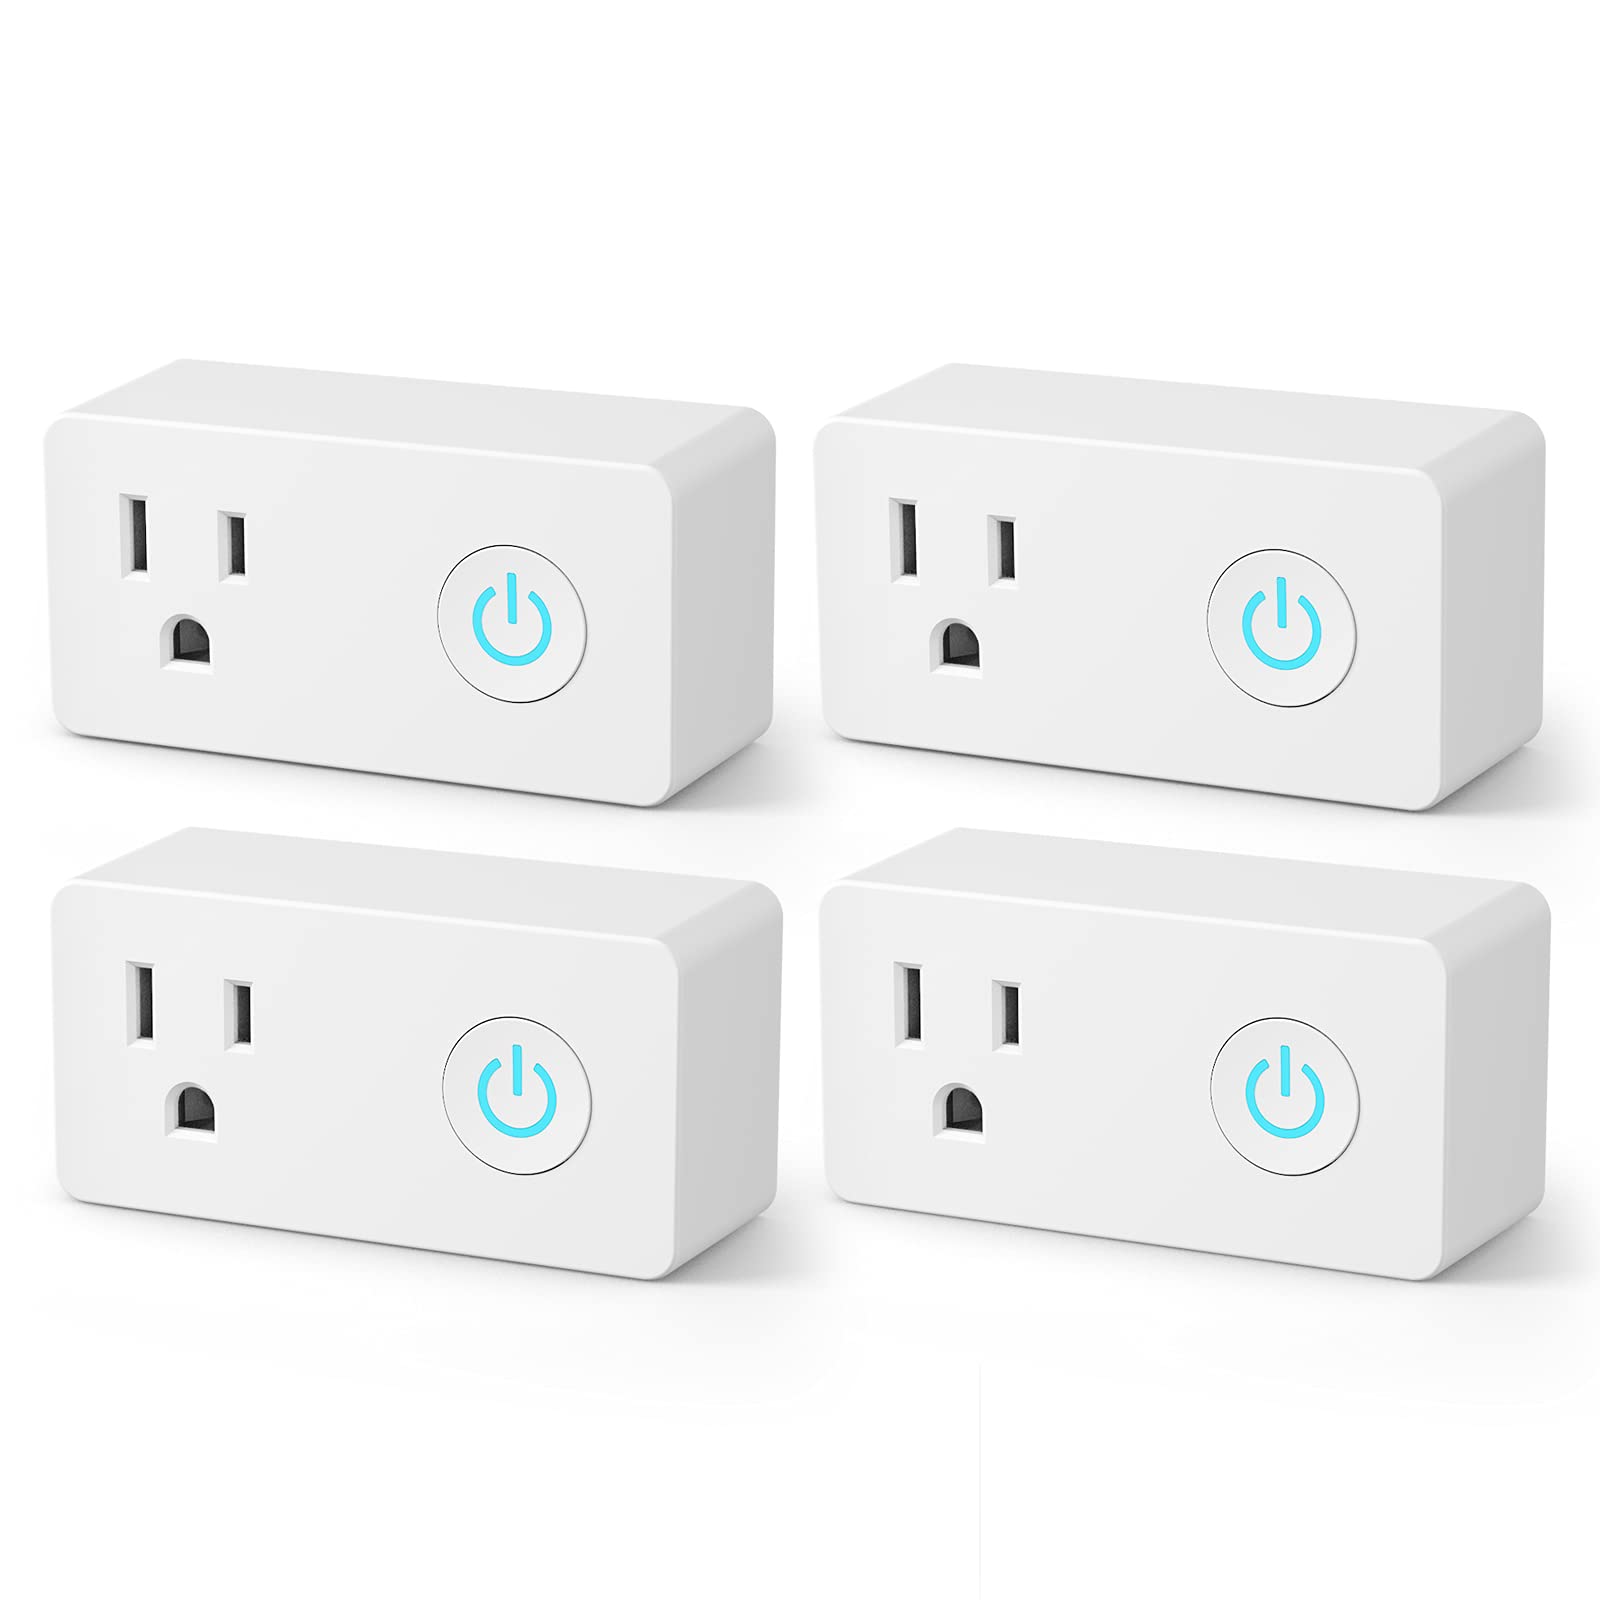 Generic Govee Smart Plug, WiFi Bluetooth Outlets 4 Pack Work with